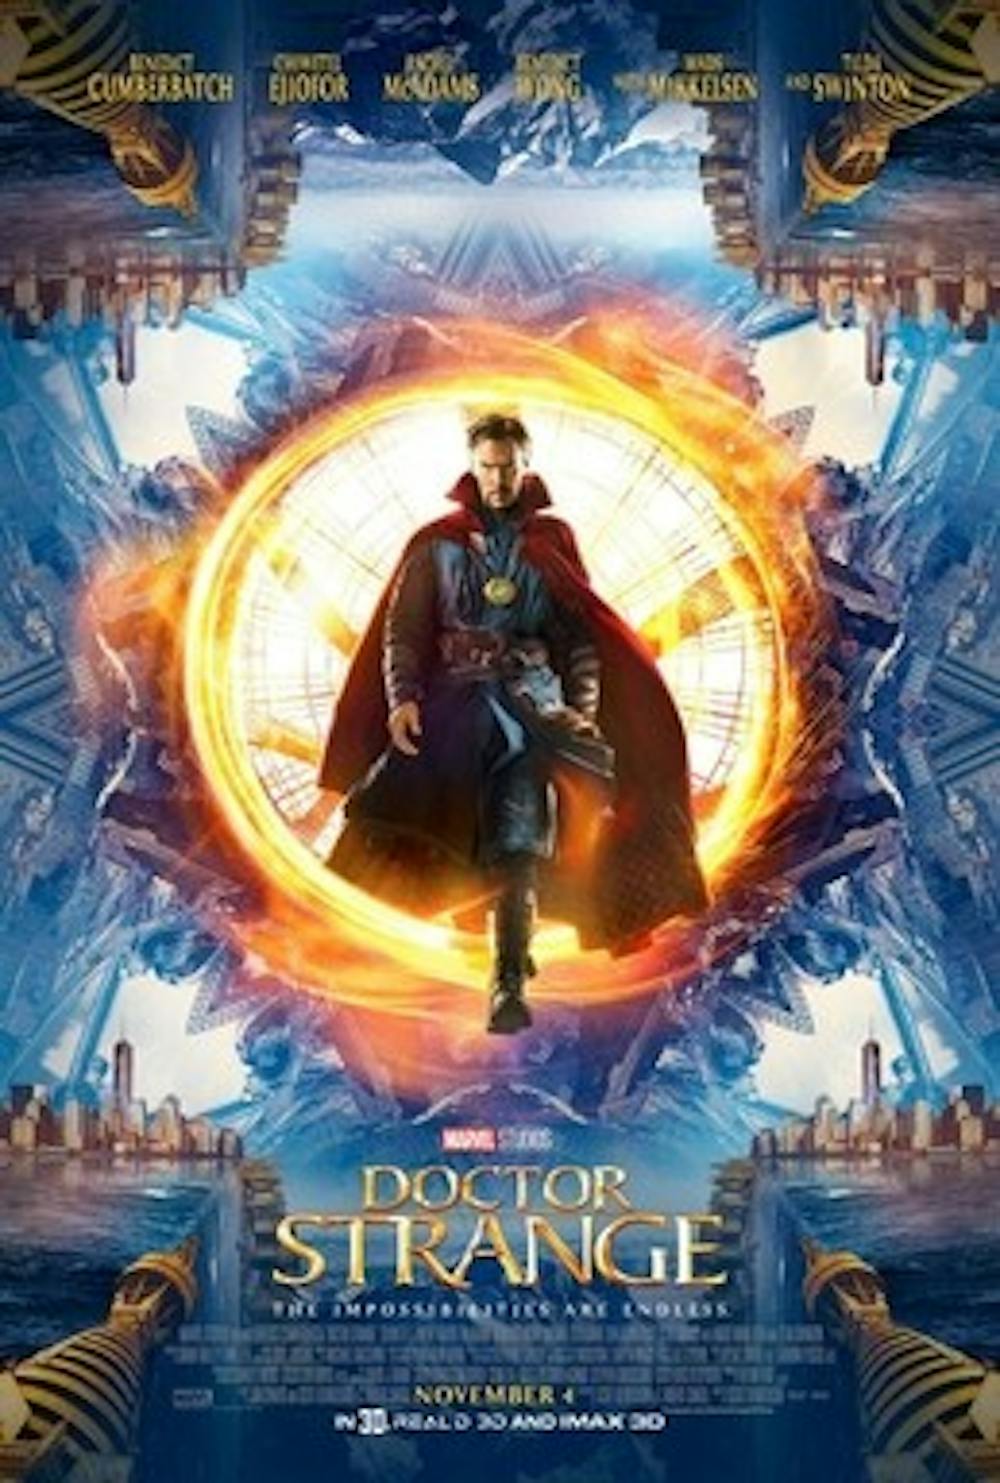 <p>The plot of “Doctor Strange” is fairly standard for a superhero flick, but the movie stands out for its breathtaking visuals and humor.</p>